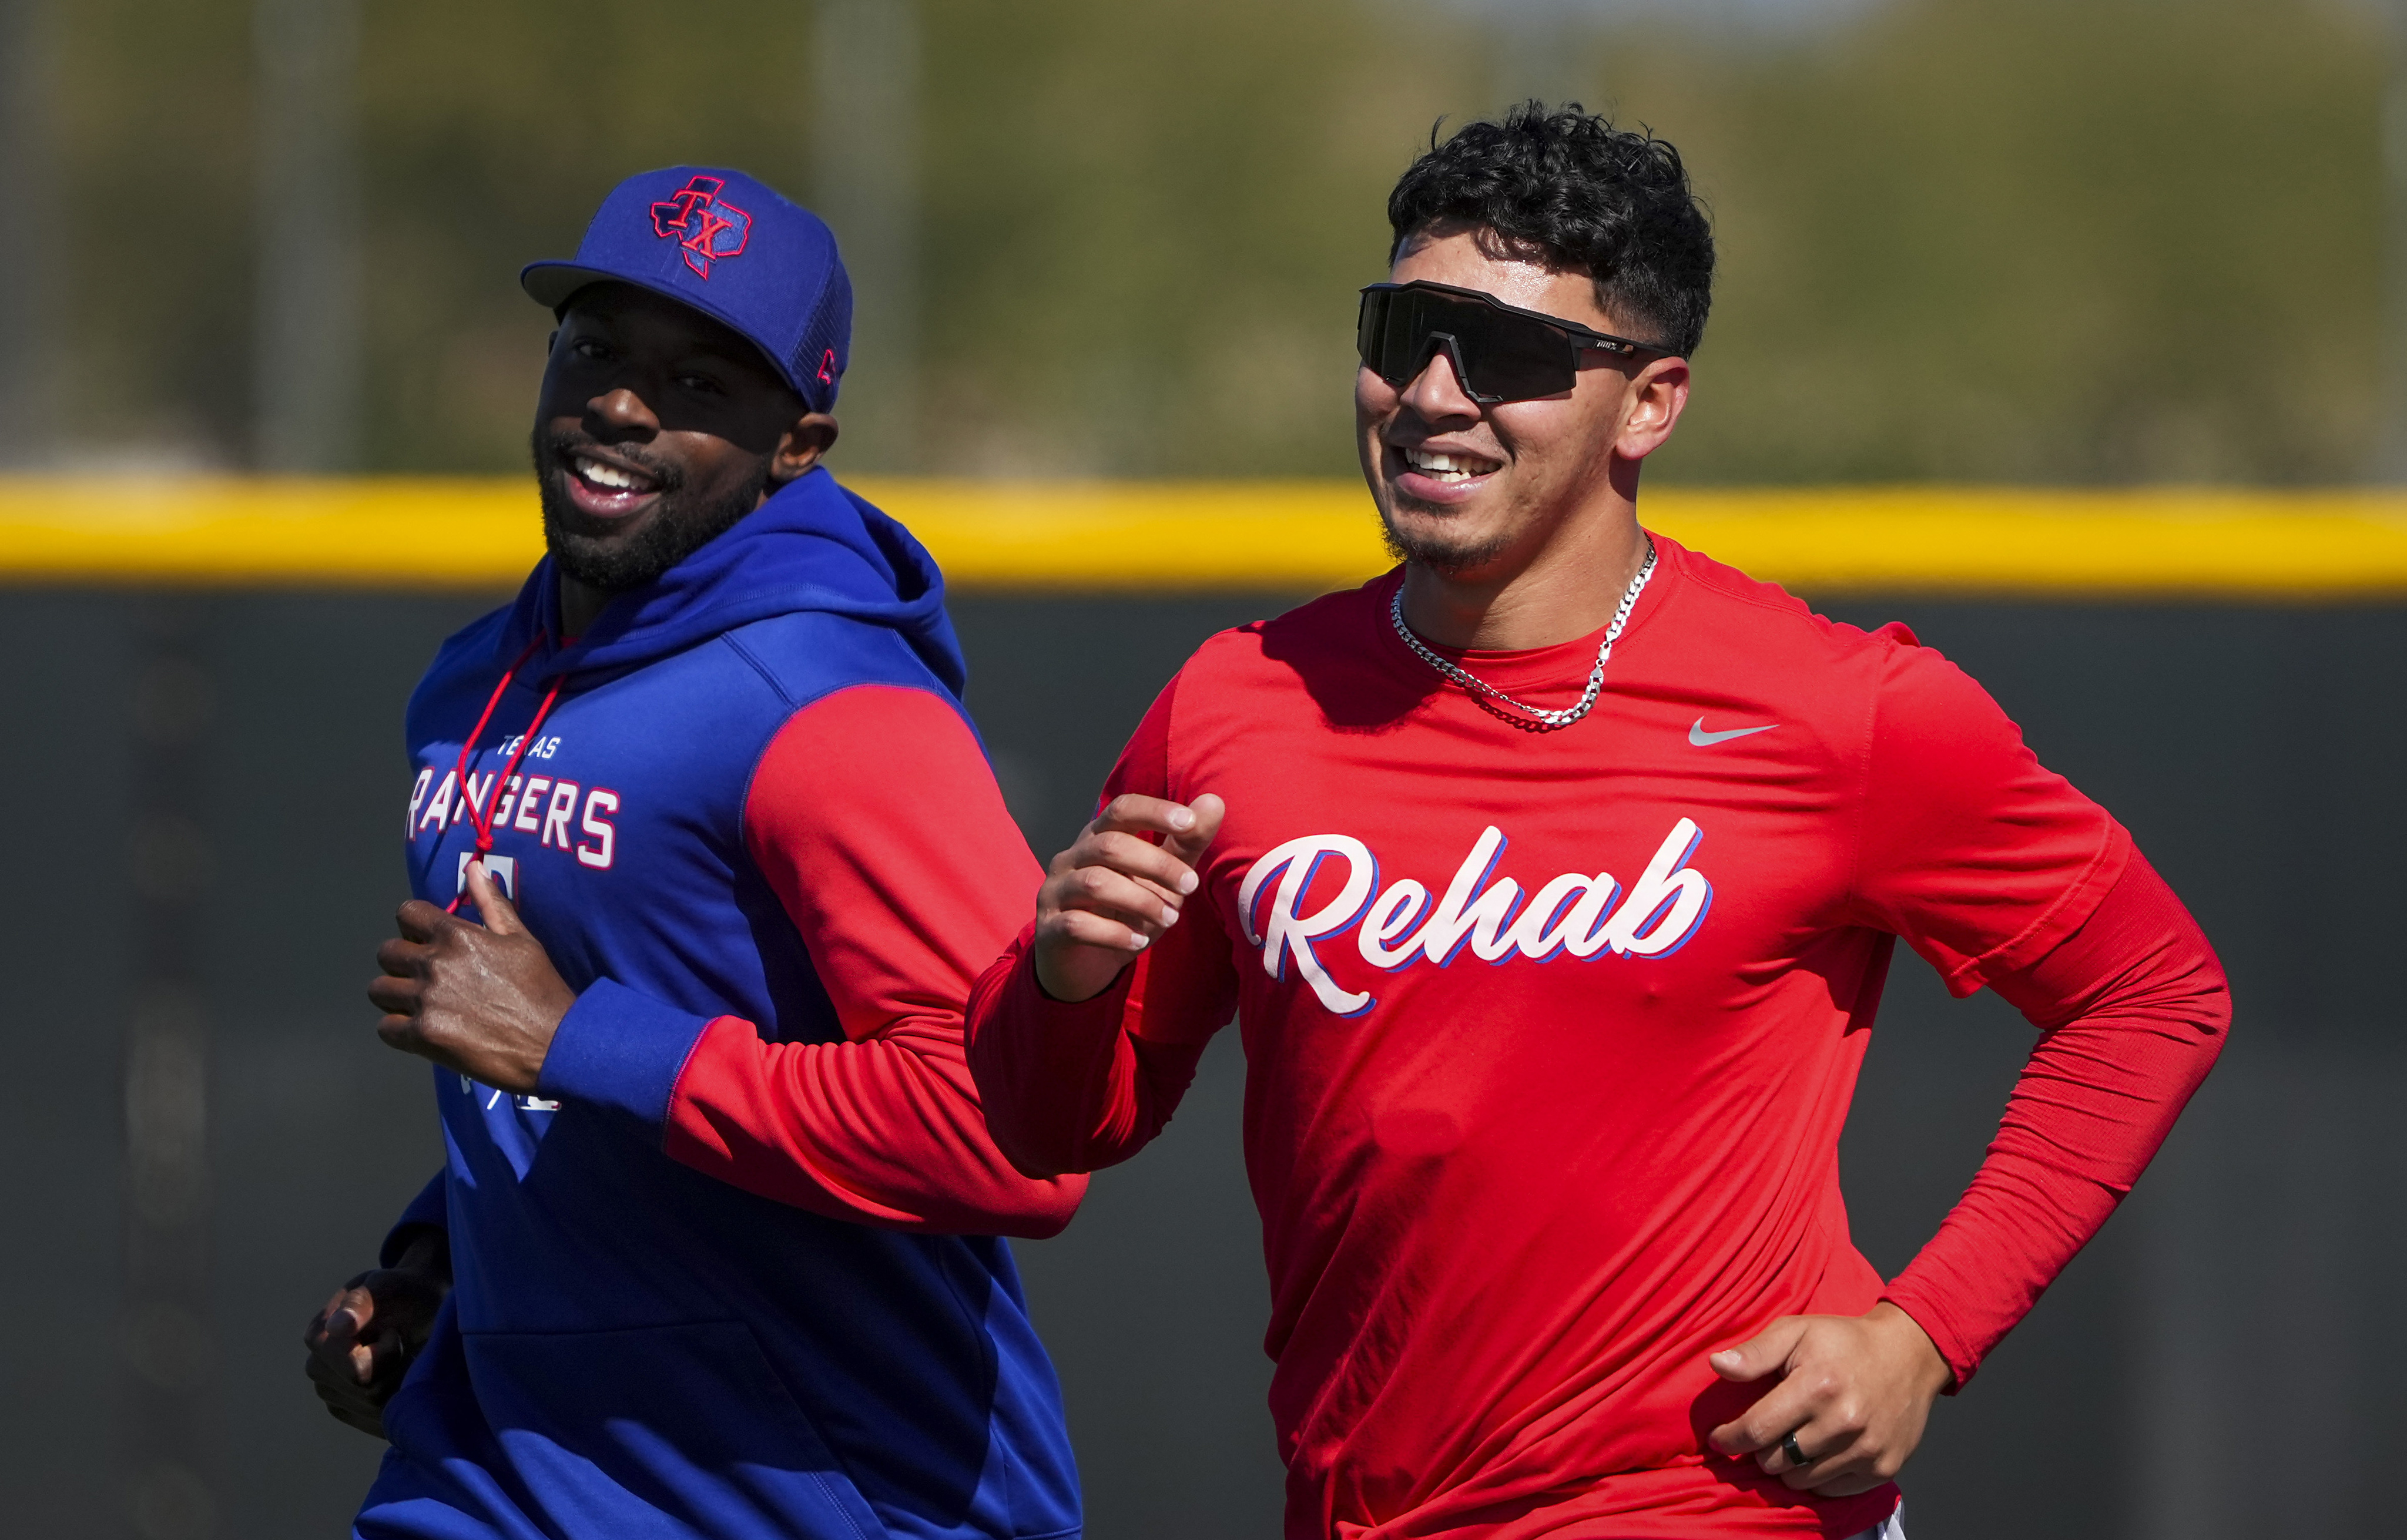 Rangers prospect Chris Seise compares nicely to Carlos Correa — in